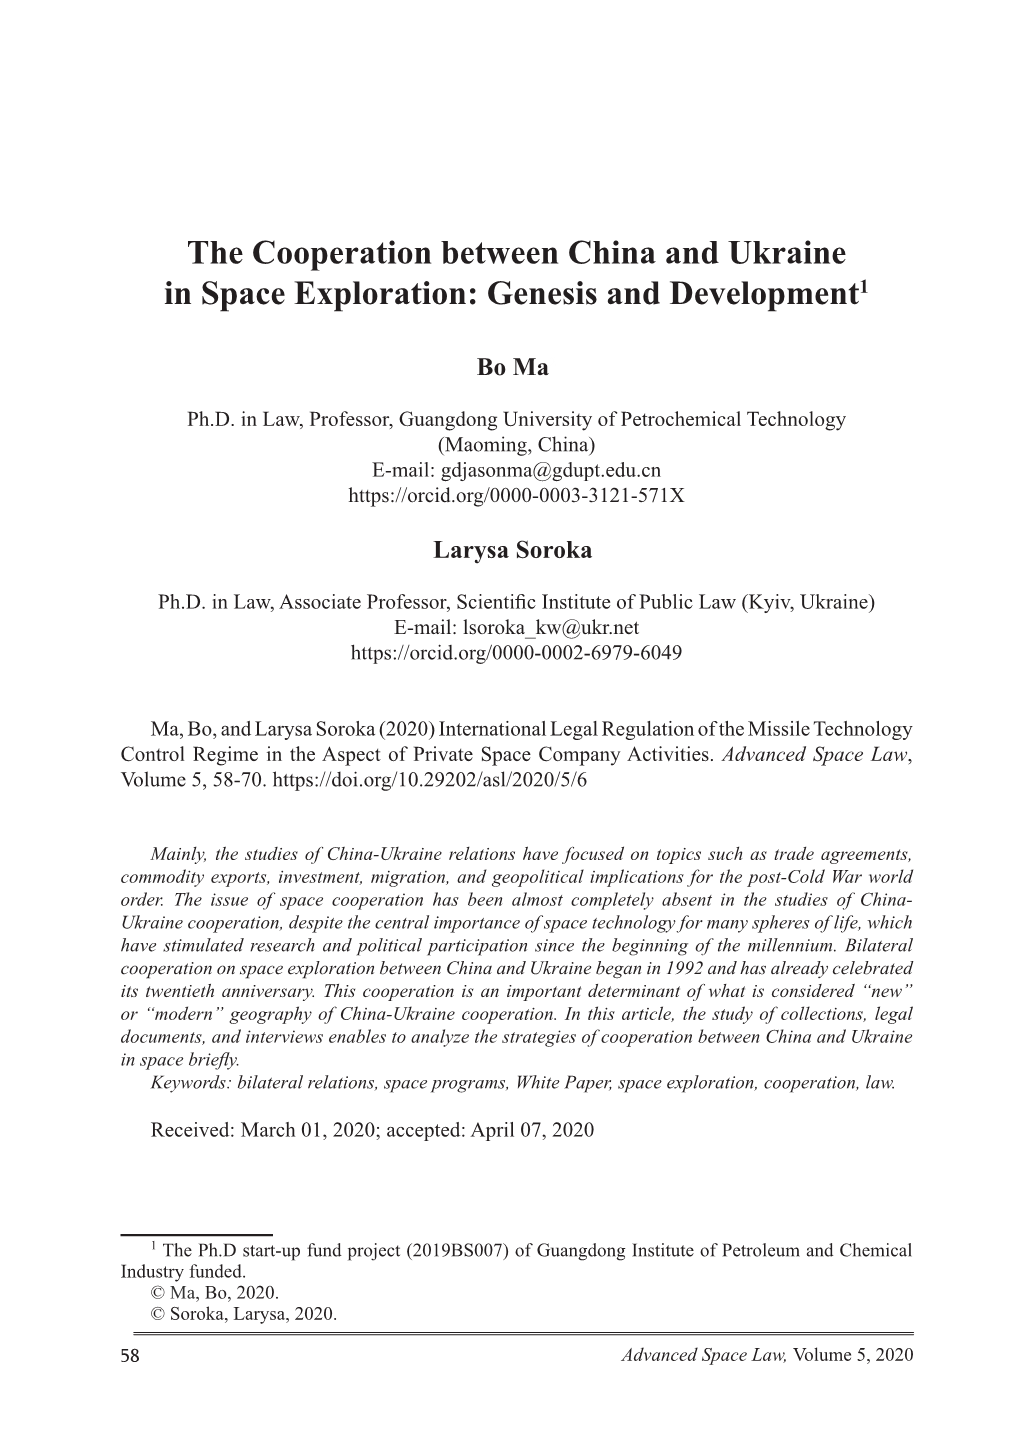 The Cooperation Between China and Ukraine in Space Exploration: Genesis and Development1